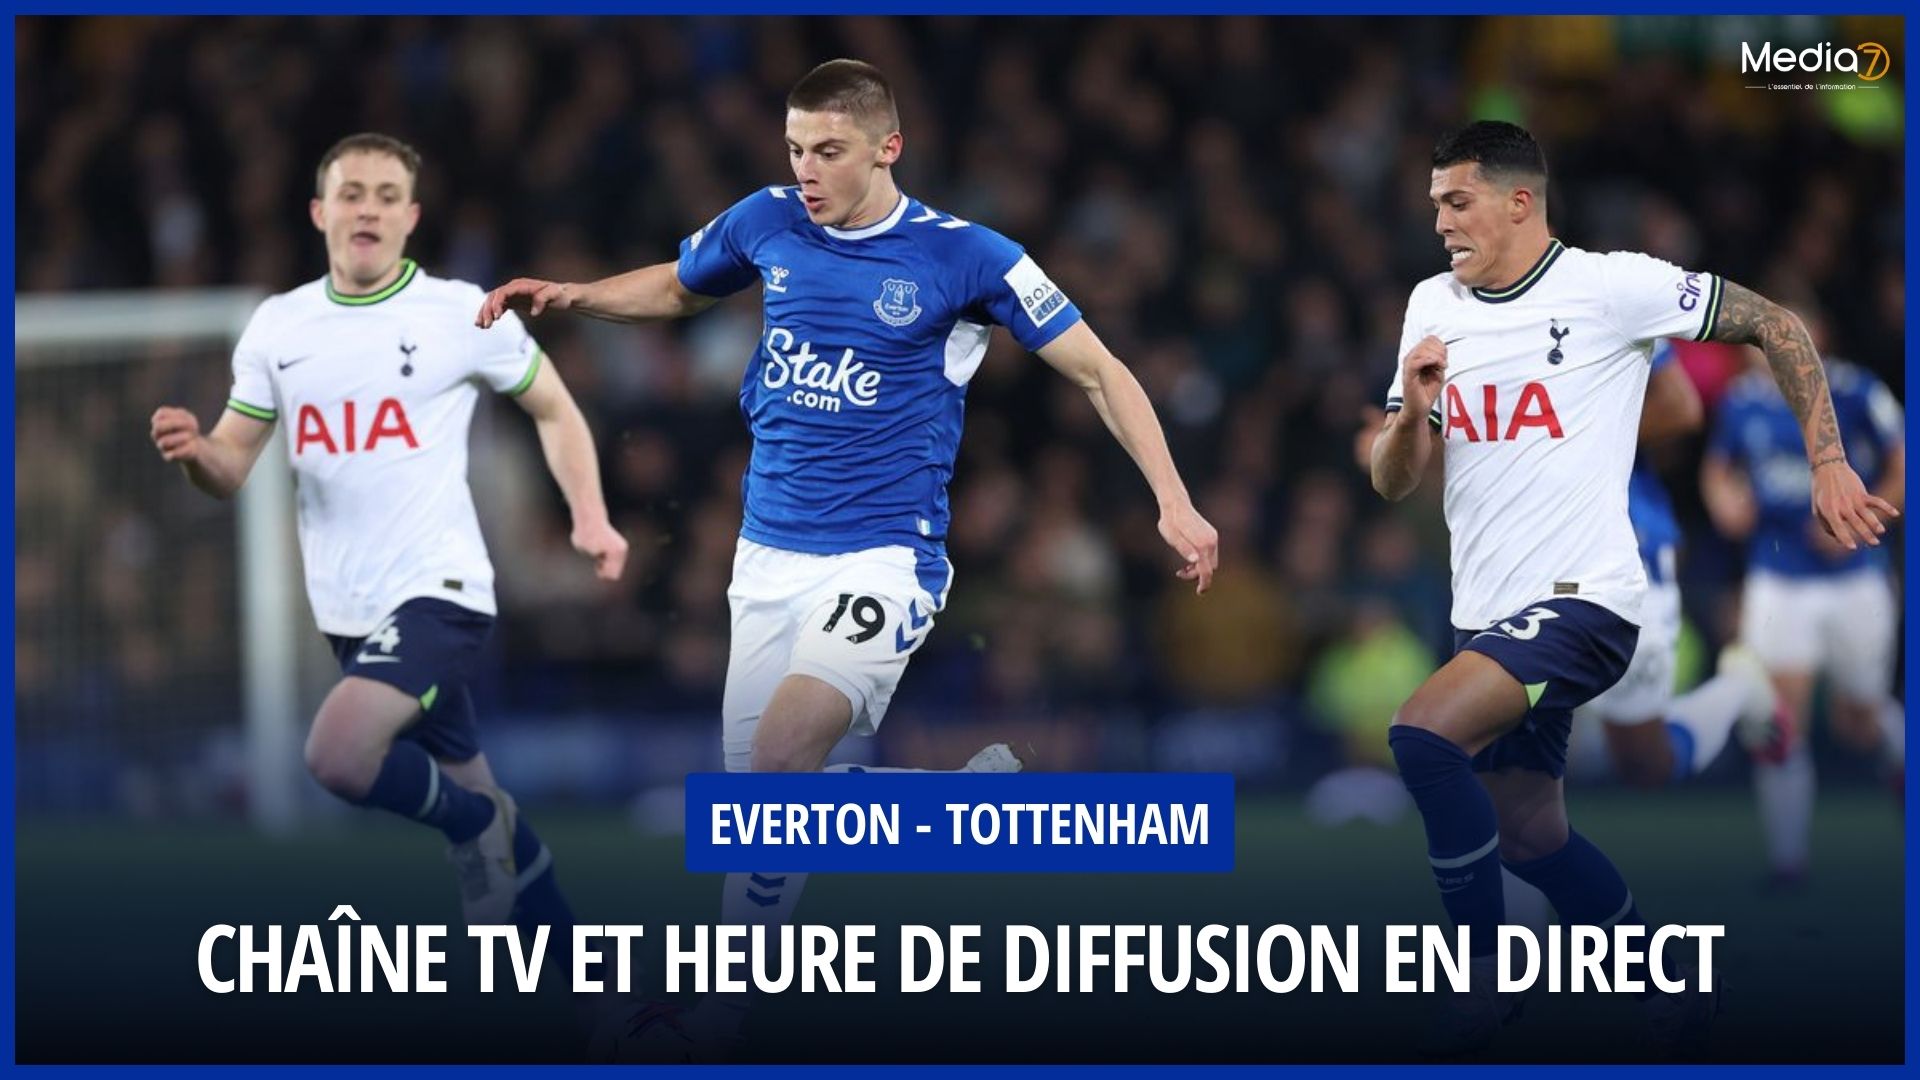 Follow the Everton - Tottenham Match live: TV Channel and Broadcast Time - Media7